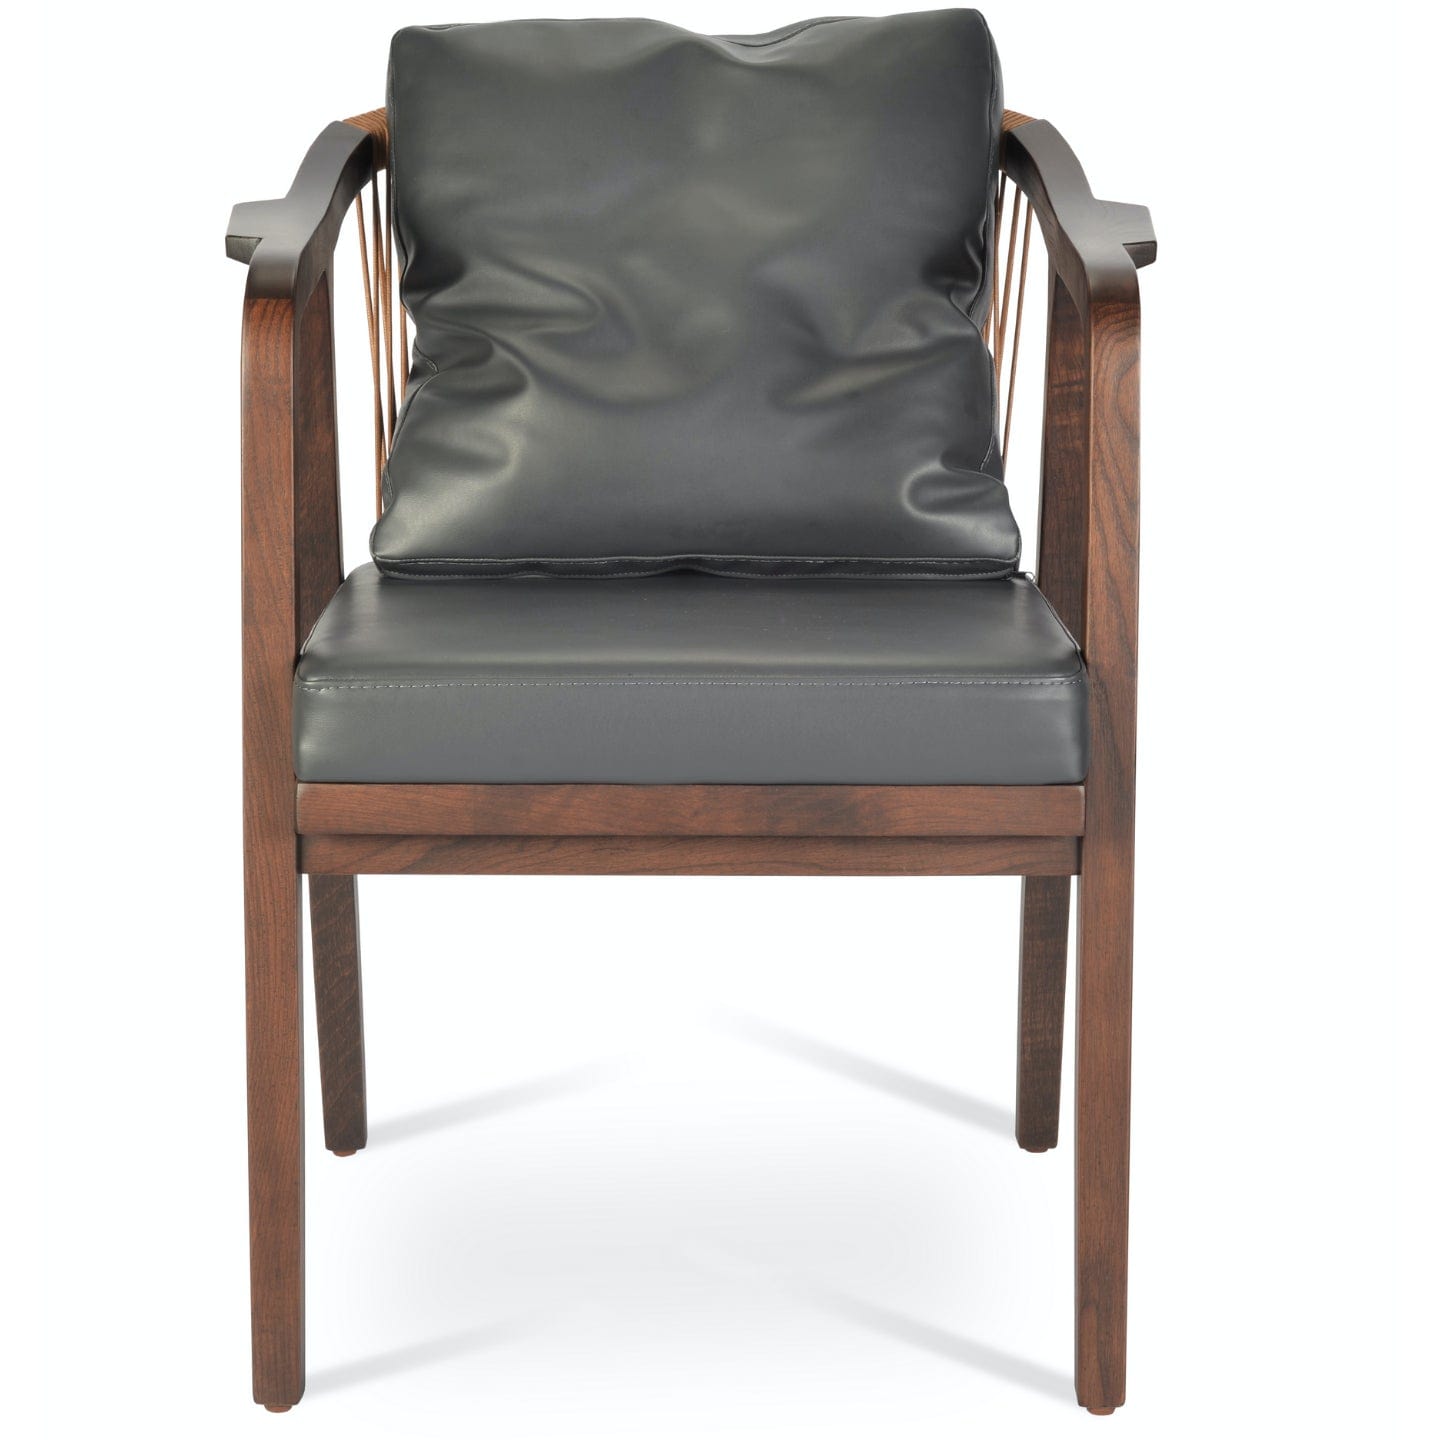 Soho Concept drops-armchair-wood-base-faux-leather-seat-dining-chair-in-grey